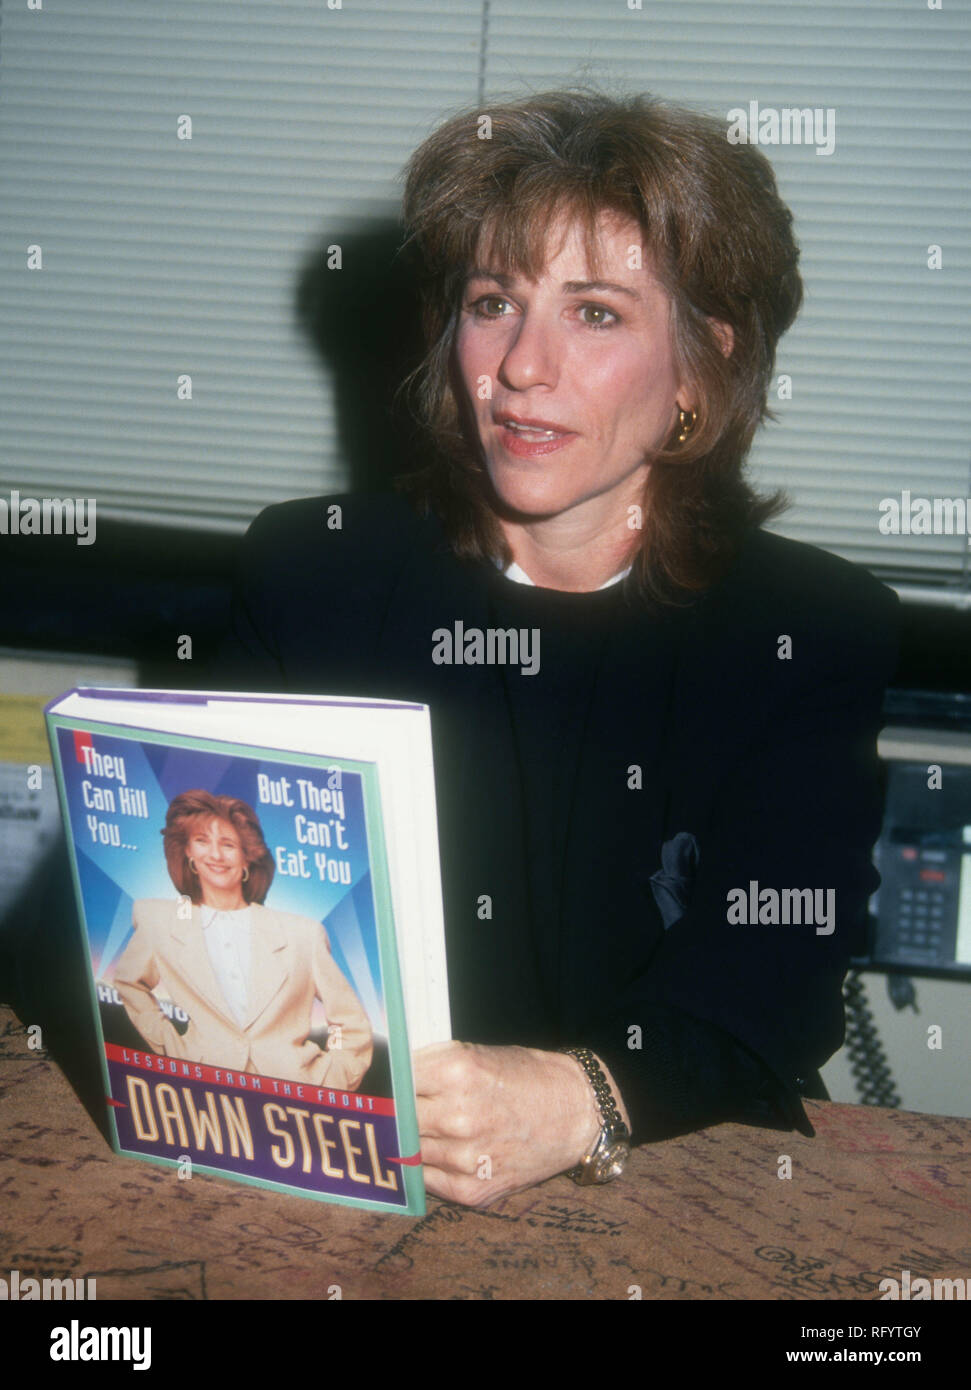 West Hollywood Ca November 19 Producerauthor Dawn Steel Autographs Copies Of Her Book They 